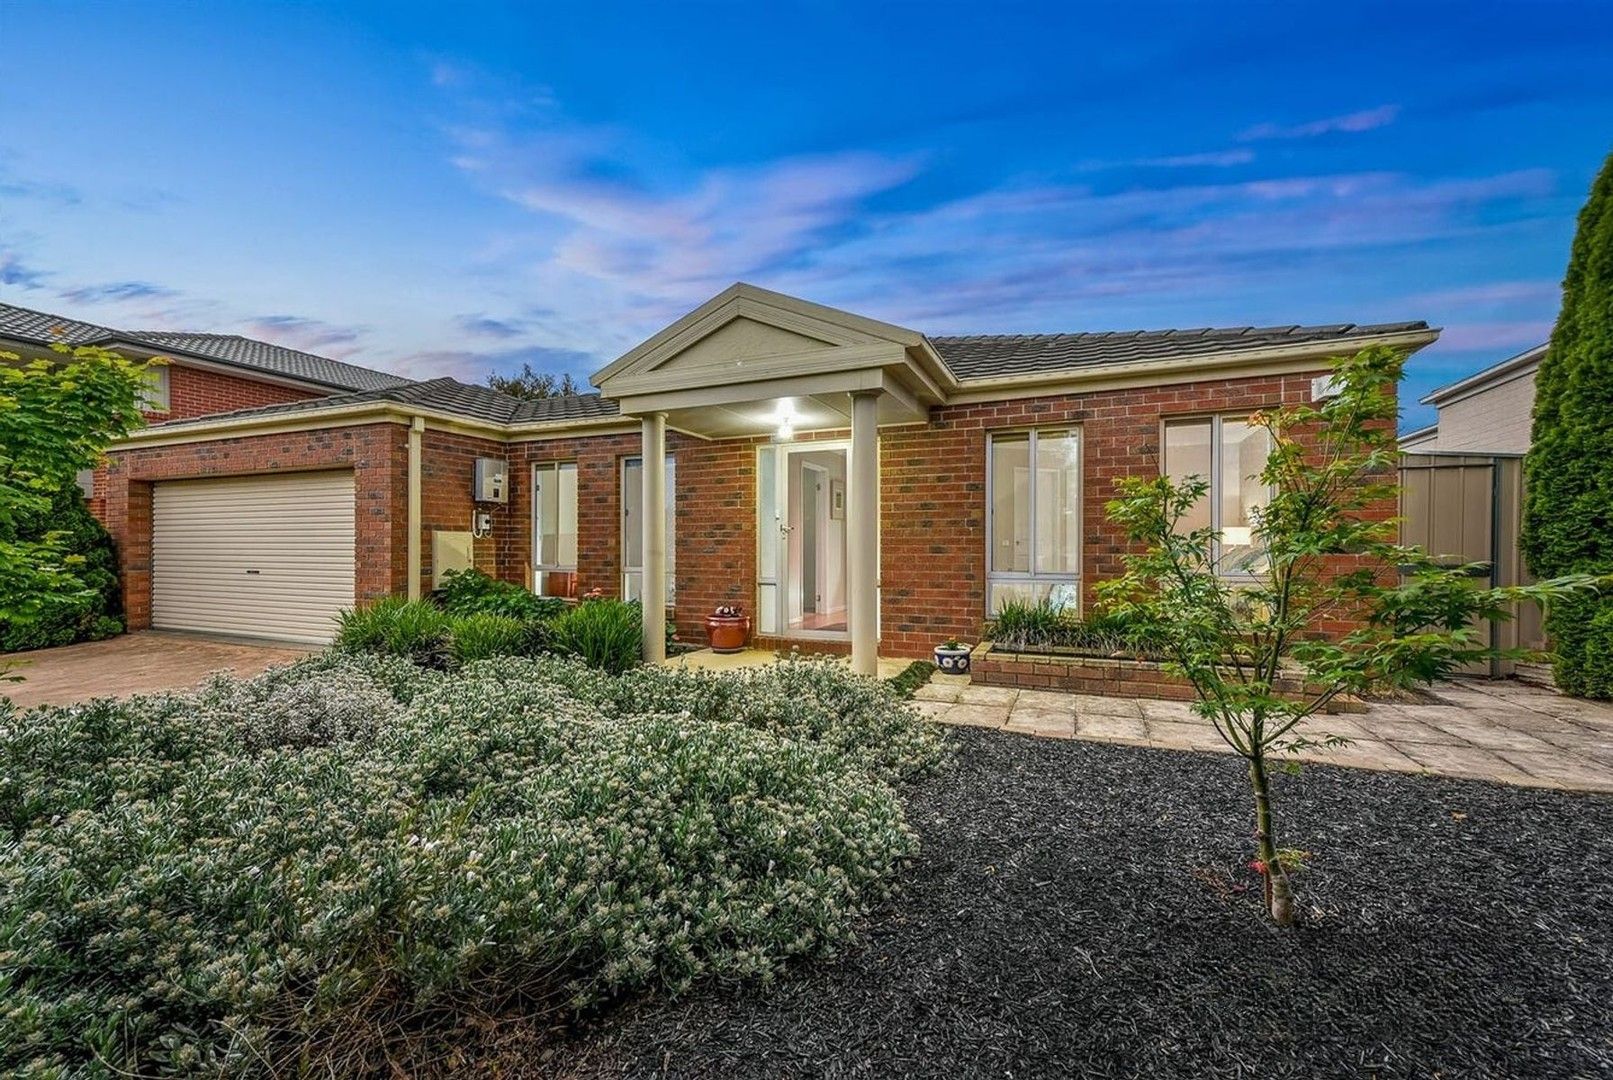 5 bedrooms House in 284 Centre Road NARRE WARREN SOUTH VIC, 3805